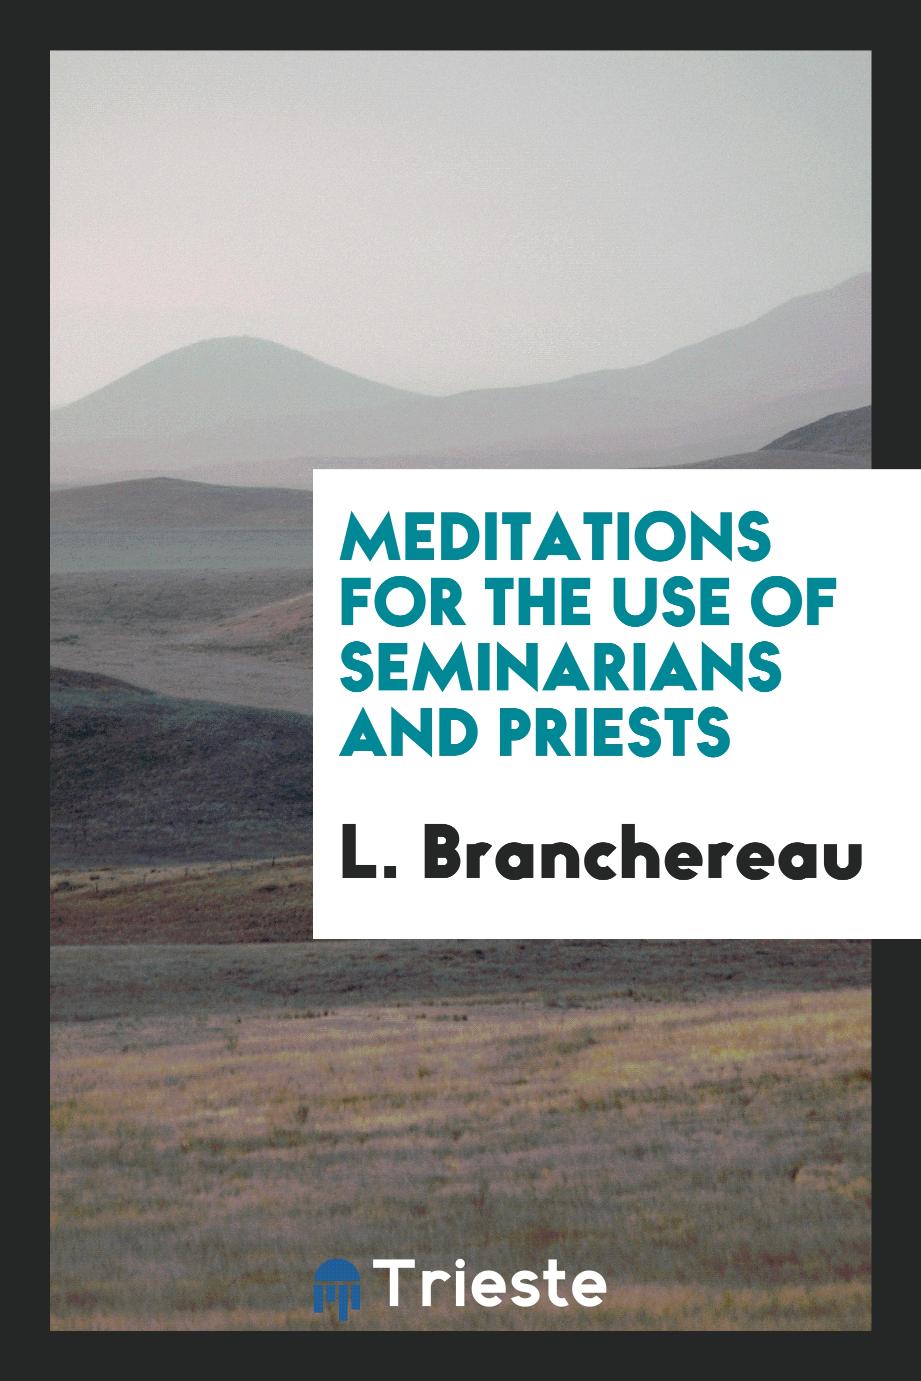 Meditations for the use of seminarians and priests